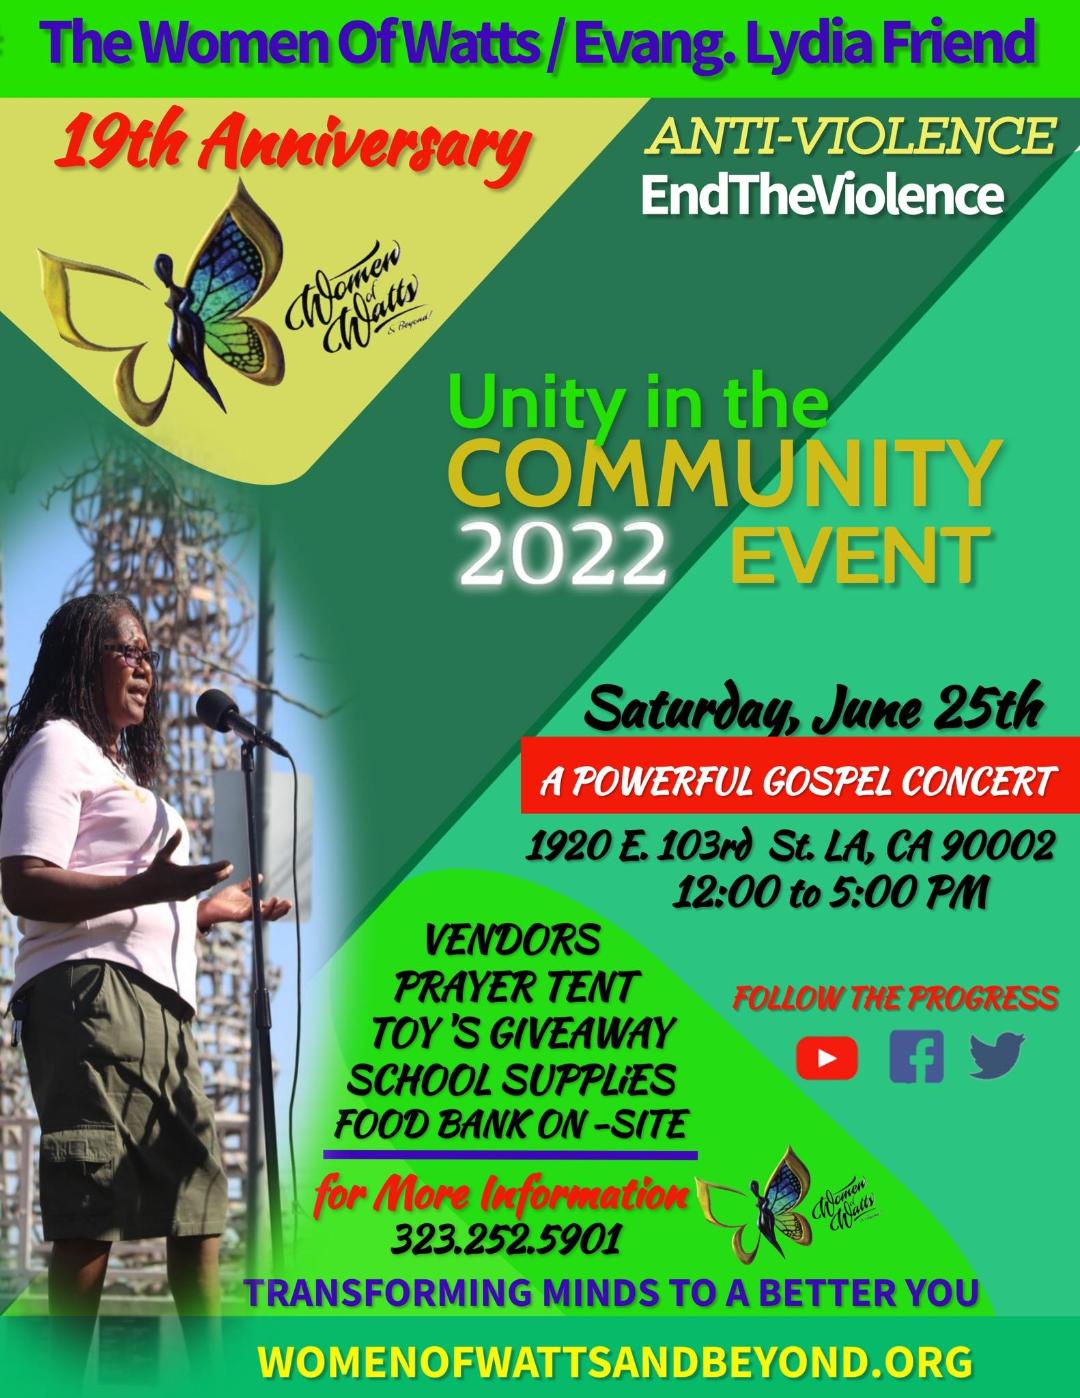 Unity in the Community Event flyer